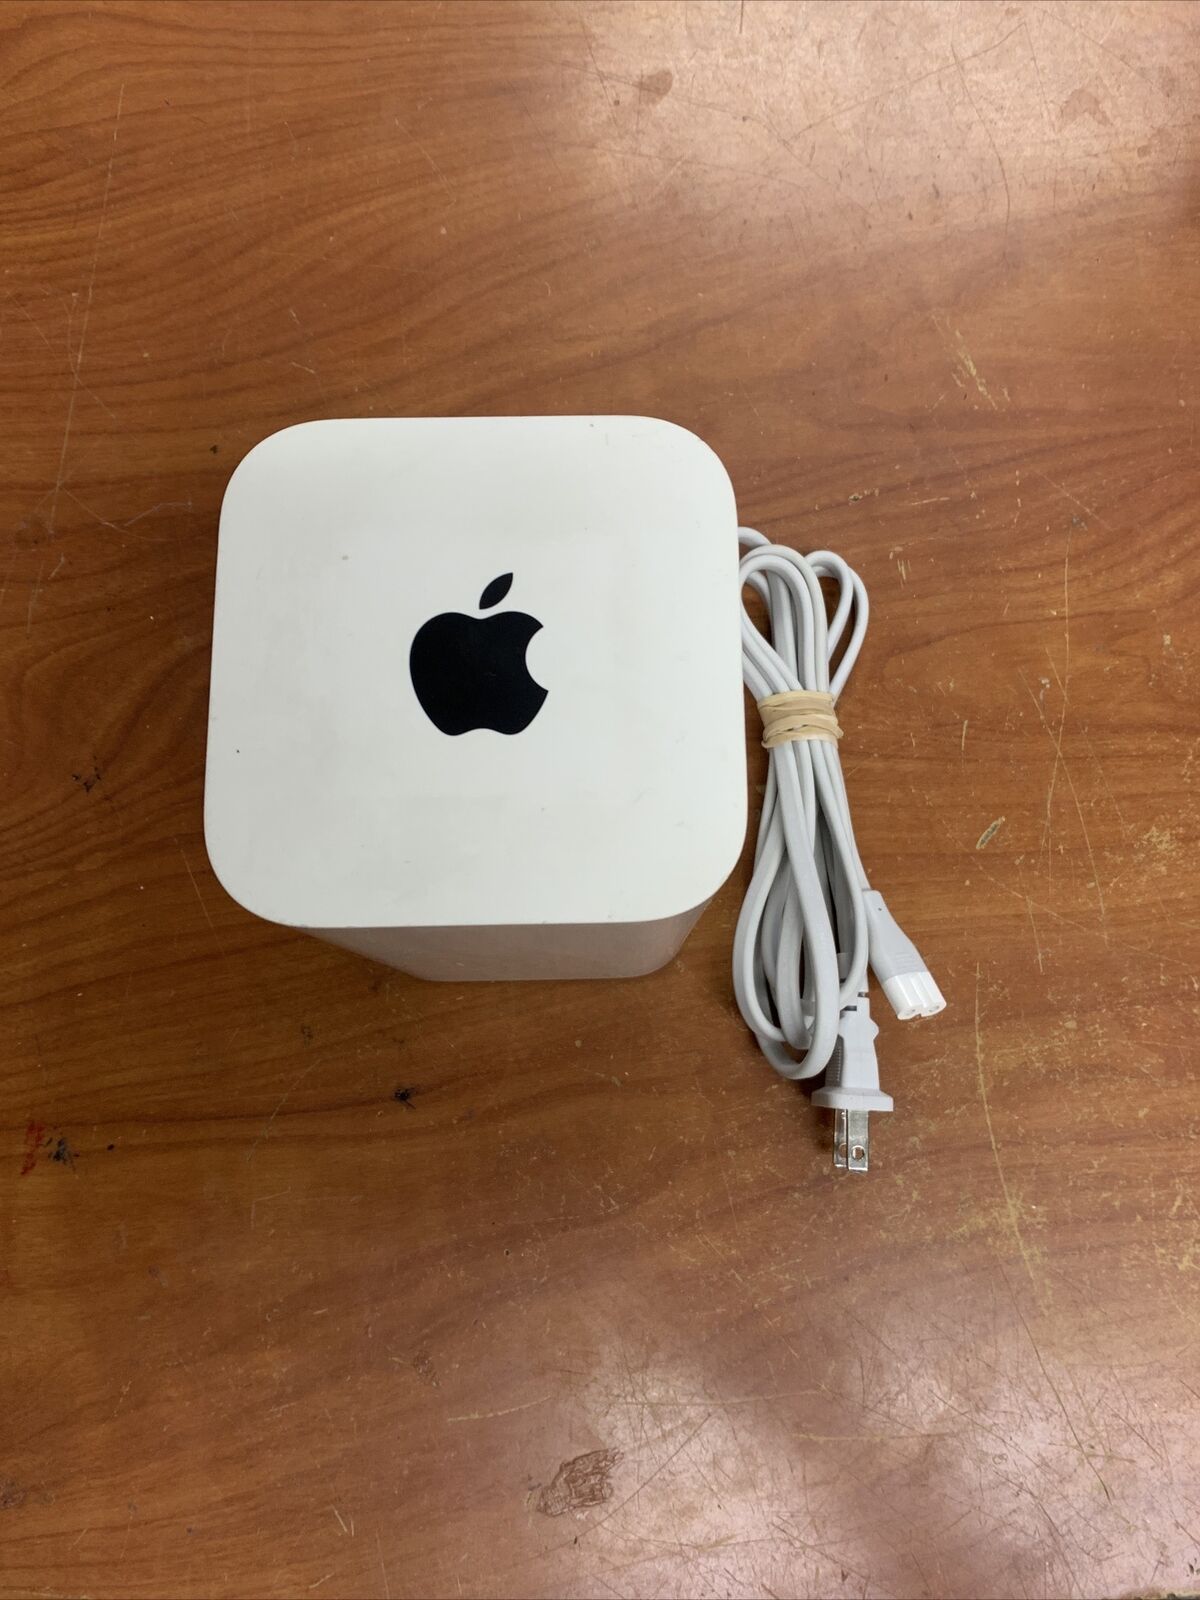 Apple AirPort Time Capsule 2TB 5th Generation Model A1470